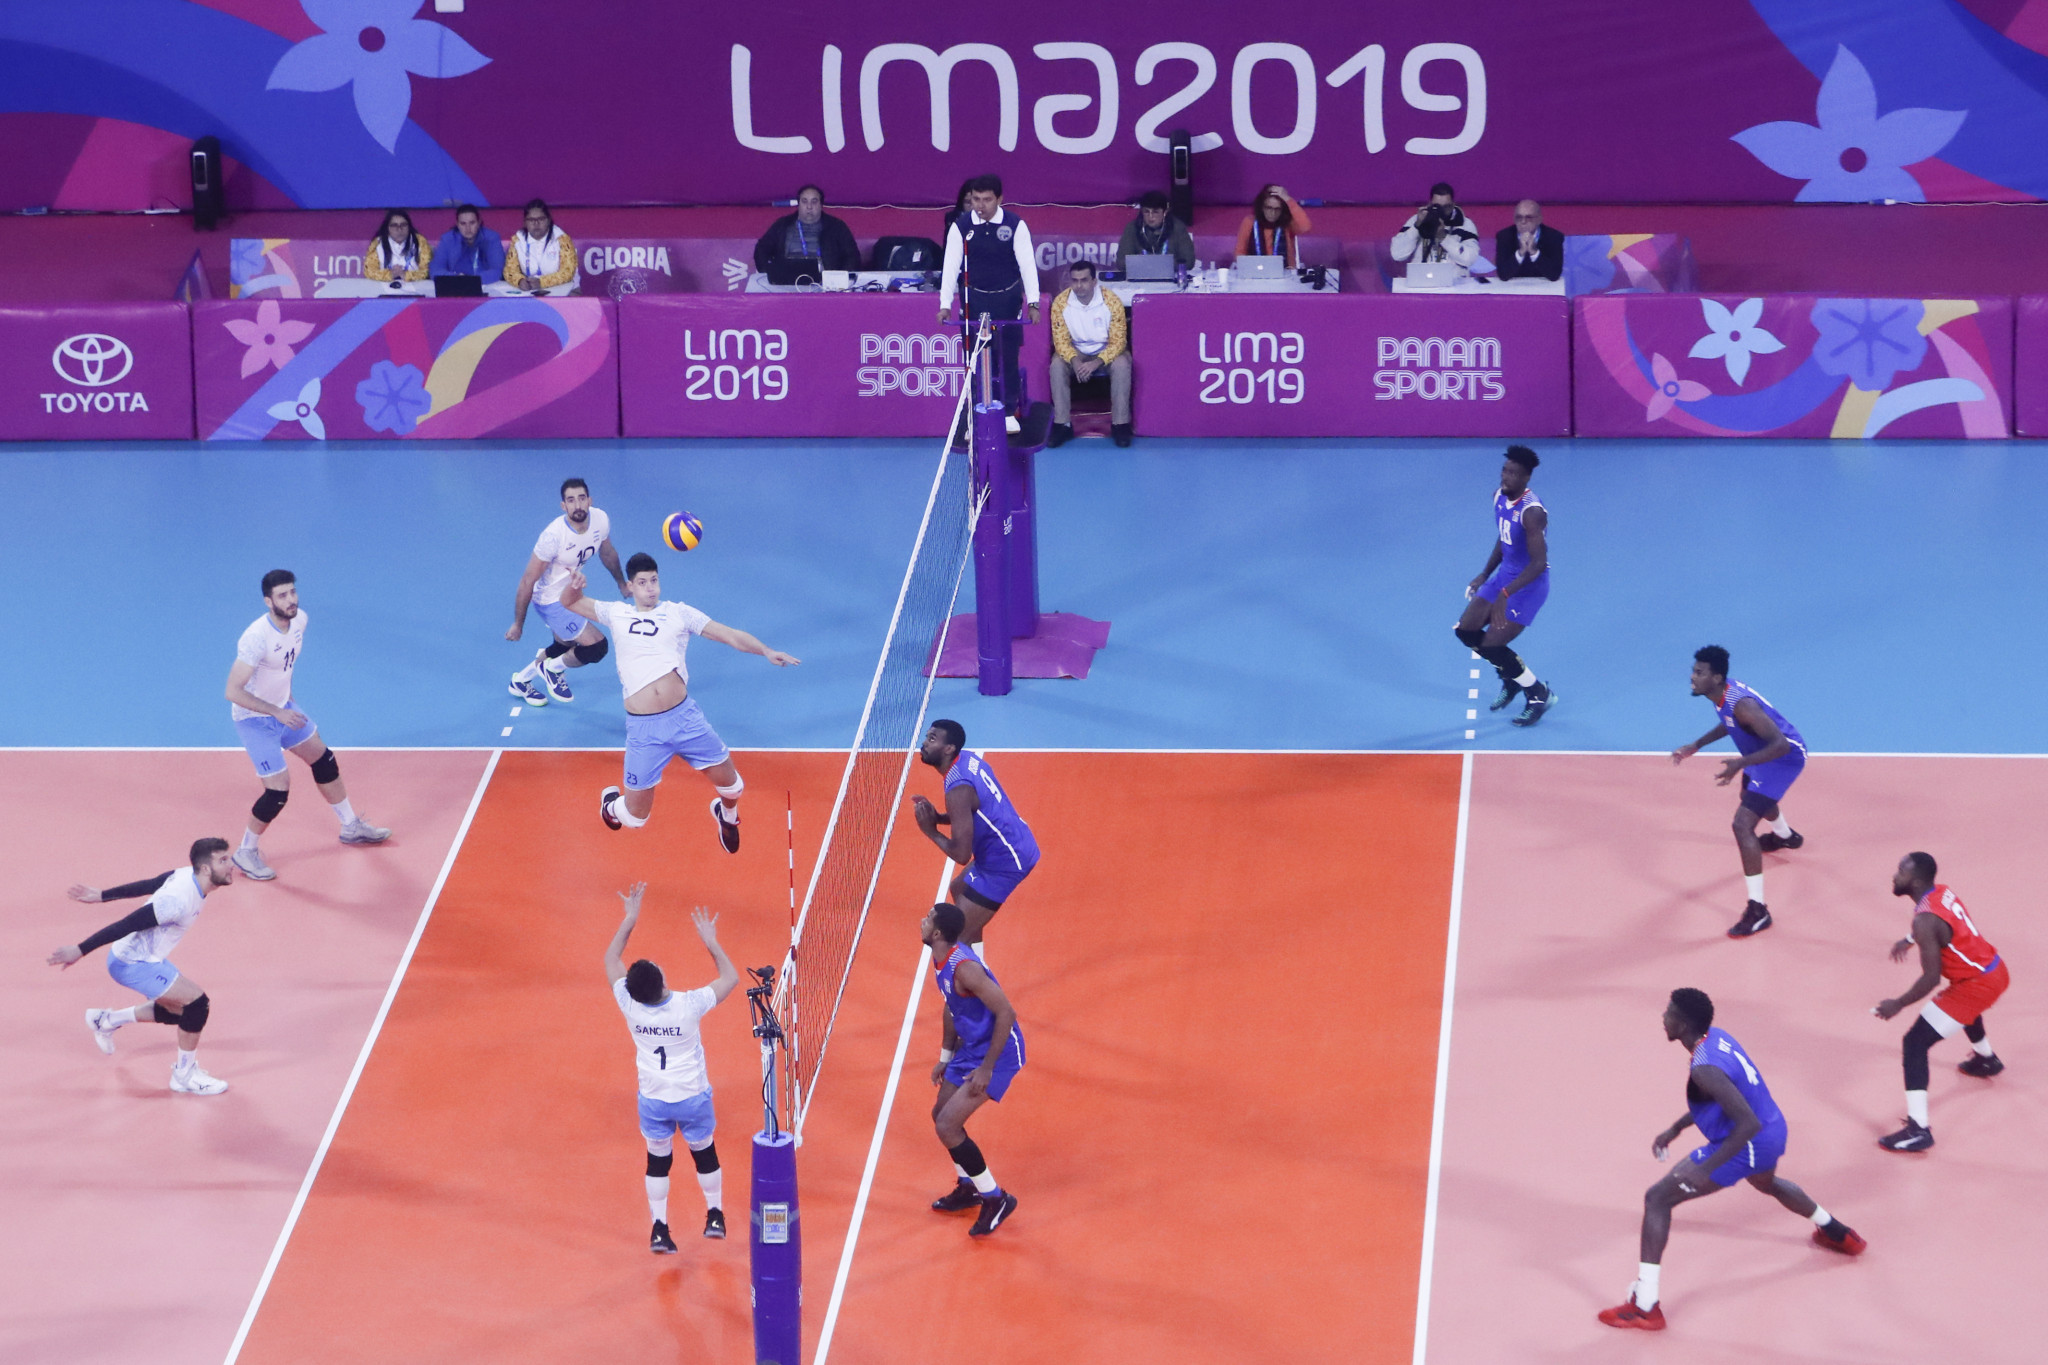 Argentina enjoyed more success in the men's volleyball final against Cuba ©Lima 2019